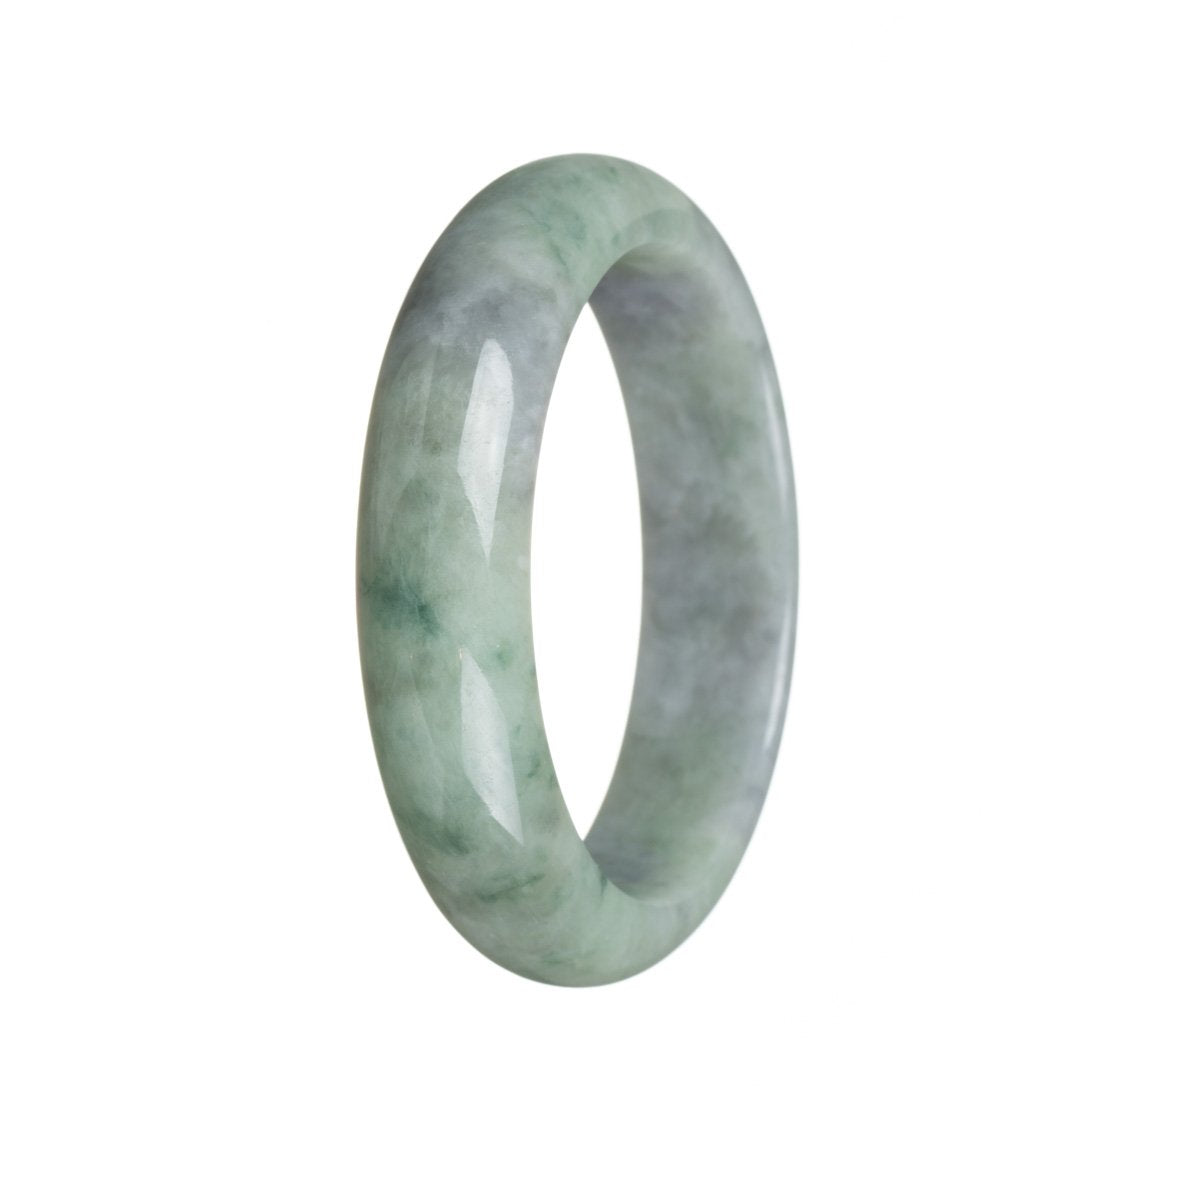 A beautiful half moon-shaped bangle bracelet made of genuine Type A green and lavender jadeite, measuring 57mm in diameter. Designed by MAYS.